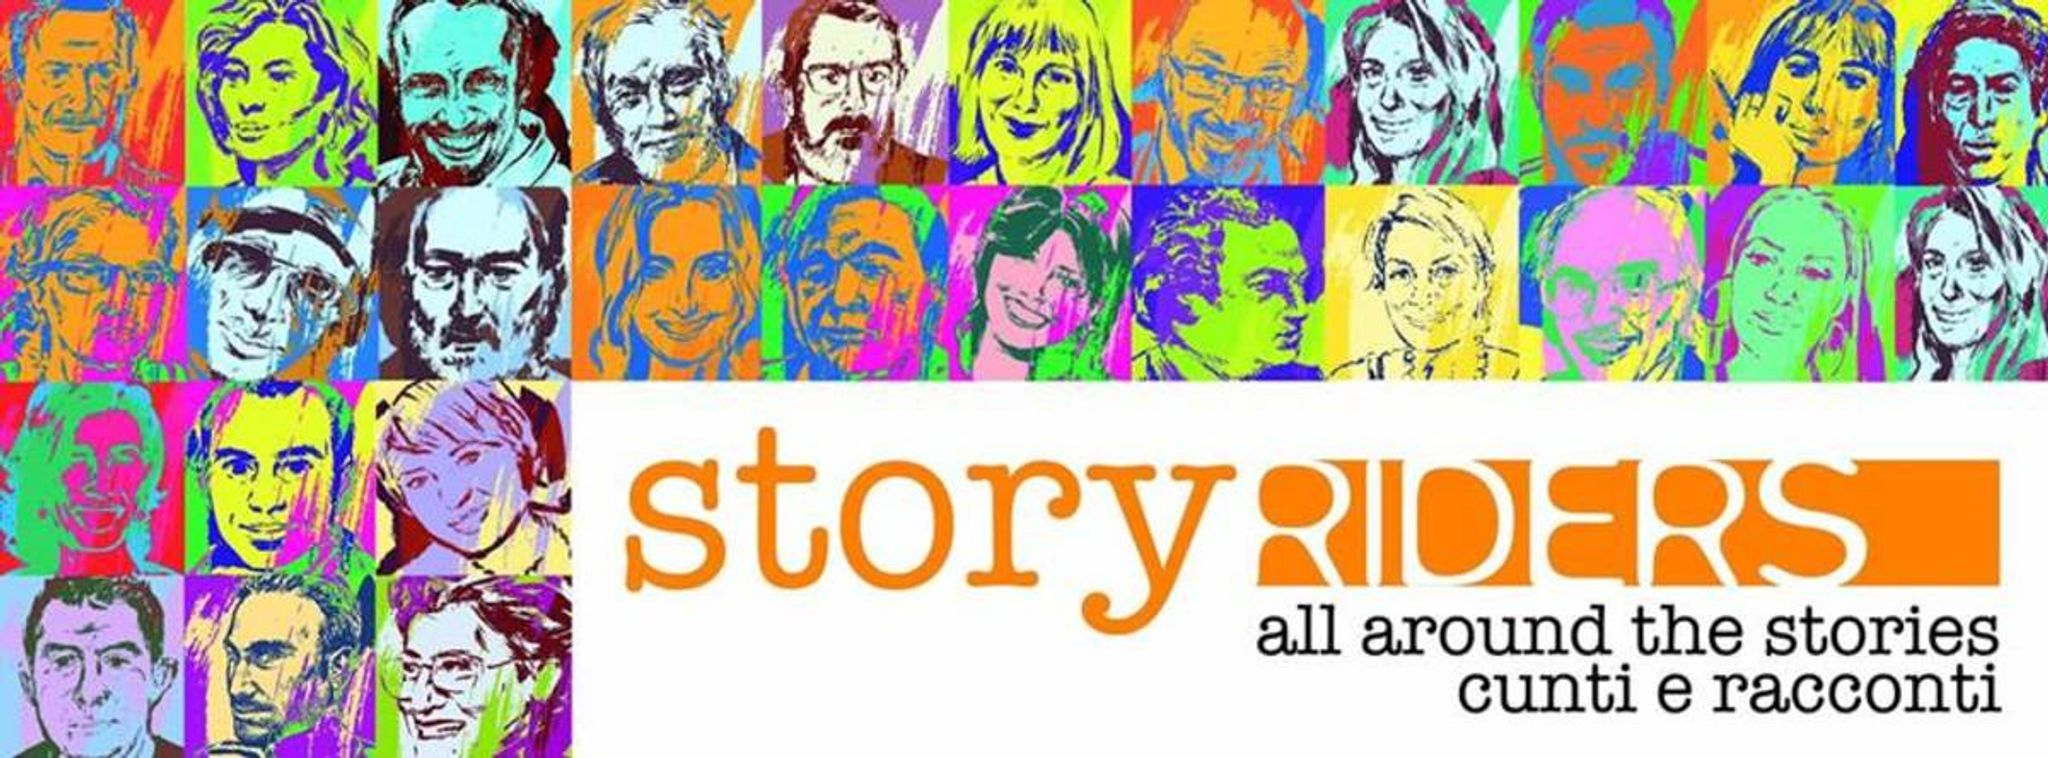 StoryRiders 2020 - All around the stories